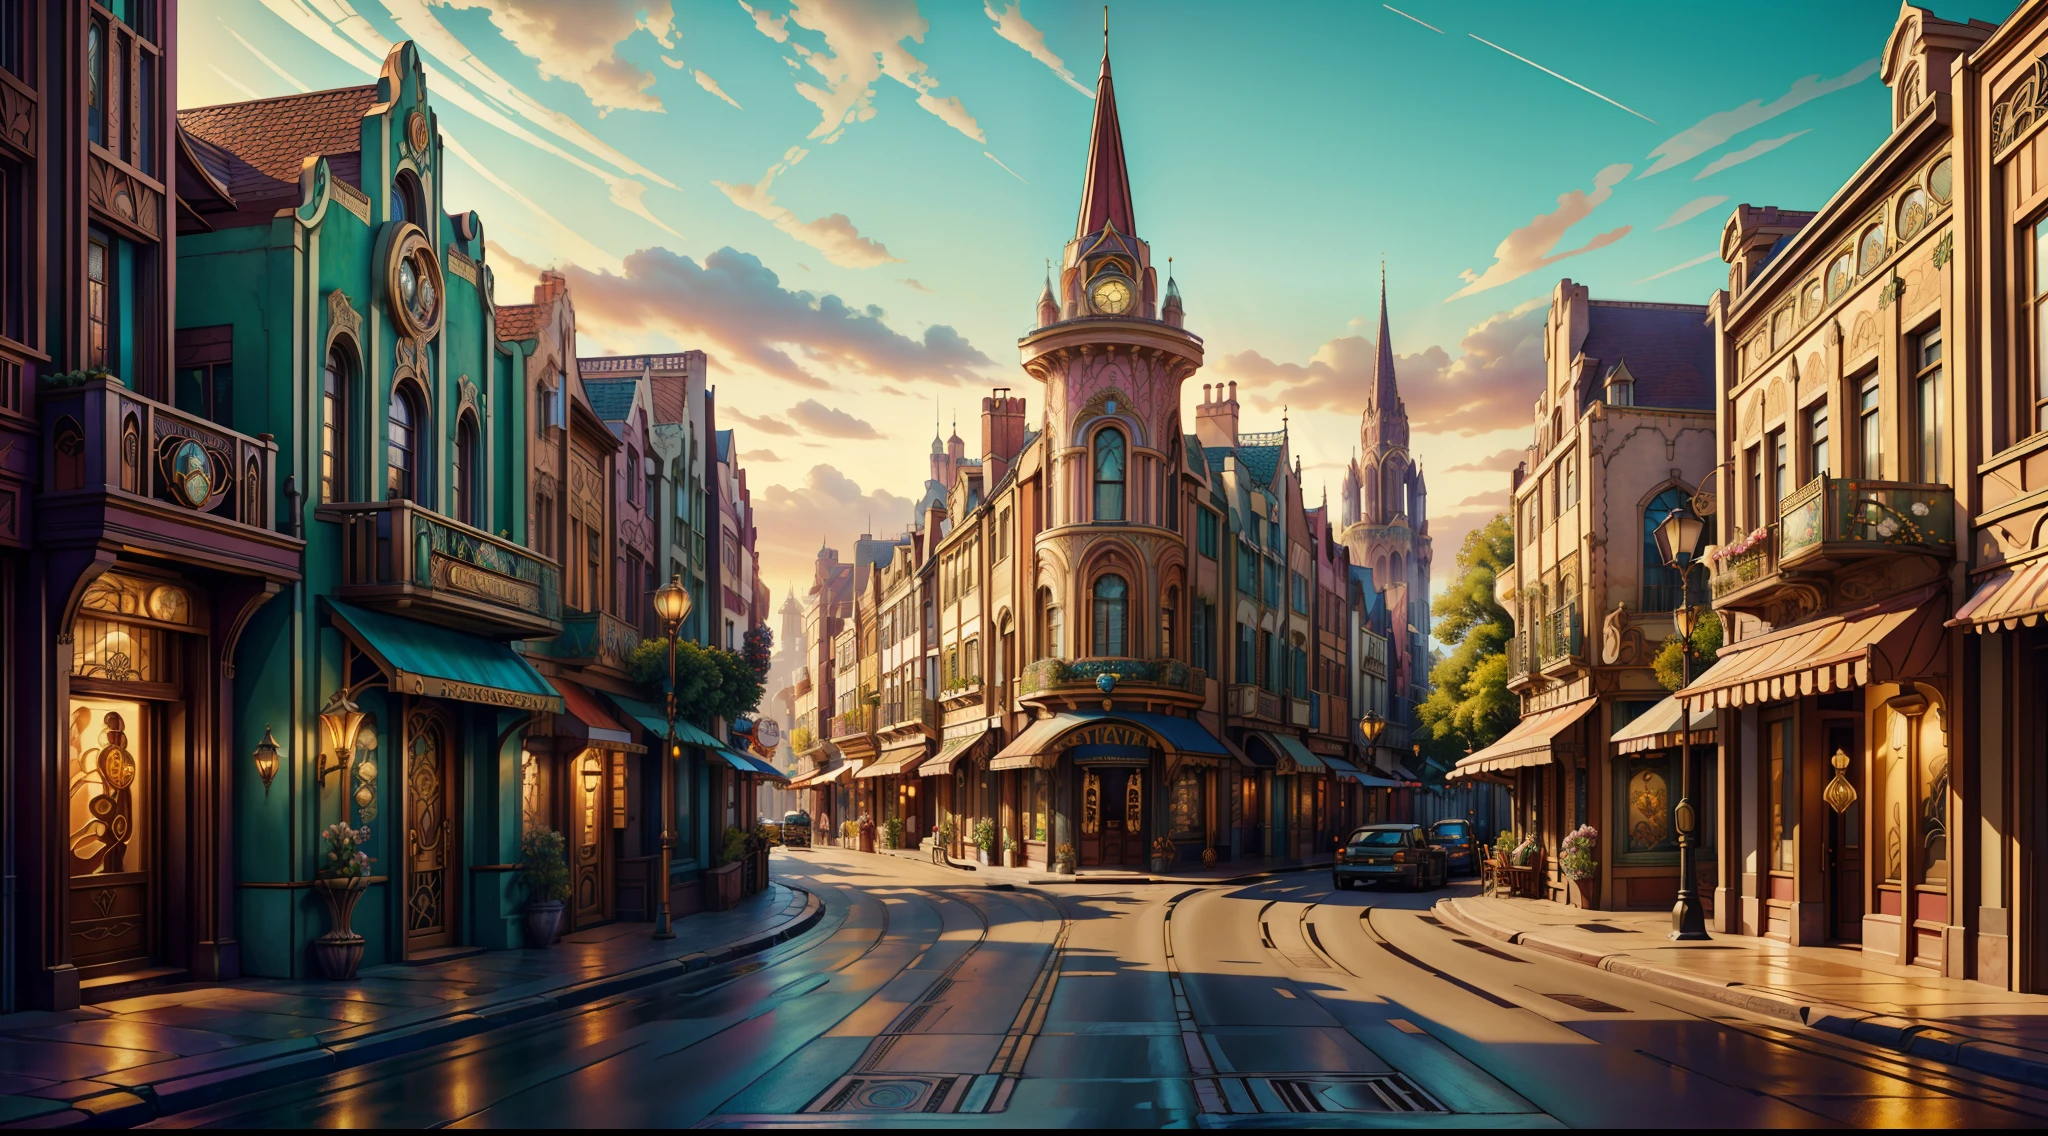 "picturesque townscape, breathtaking architecture ((Art Nouveau style)), ((paved street)), ((magic shops: 0.5)); town square, charming, vibrant cityscape, enchanting magical fantasy ambiance, (masterpiece), (best quality), (ultra-detailed) beautiful surroundings in the background, many flowers and trees, insanely detailed and intricate, hypermaximalist, elegant, ornate, hyper realistic, Cinematic Lighting, Side-View, scenery"